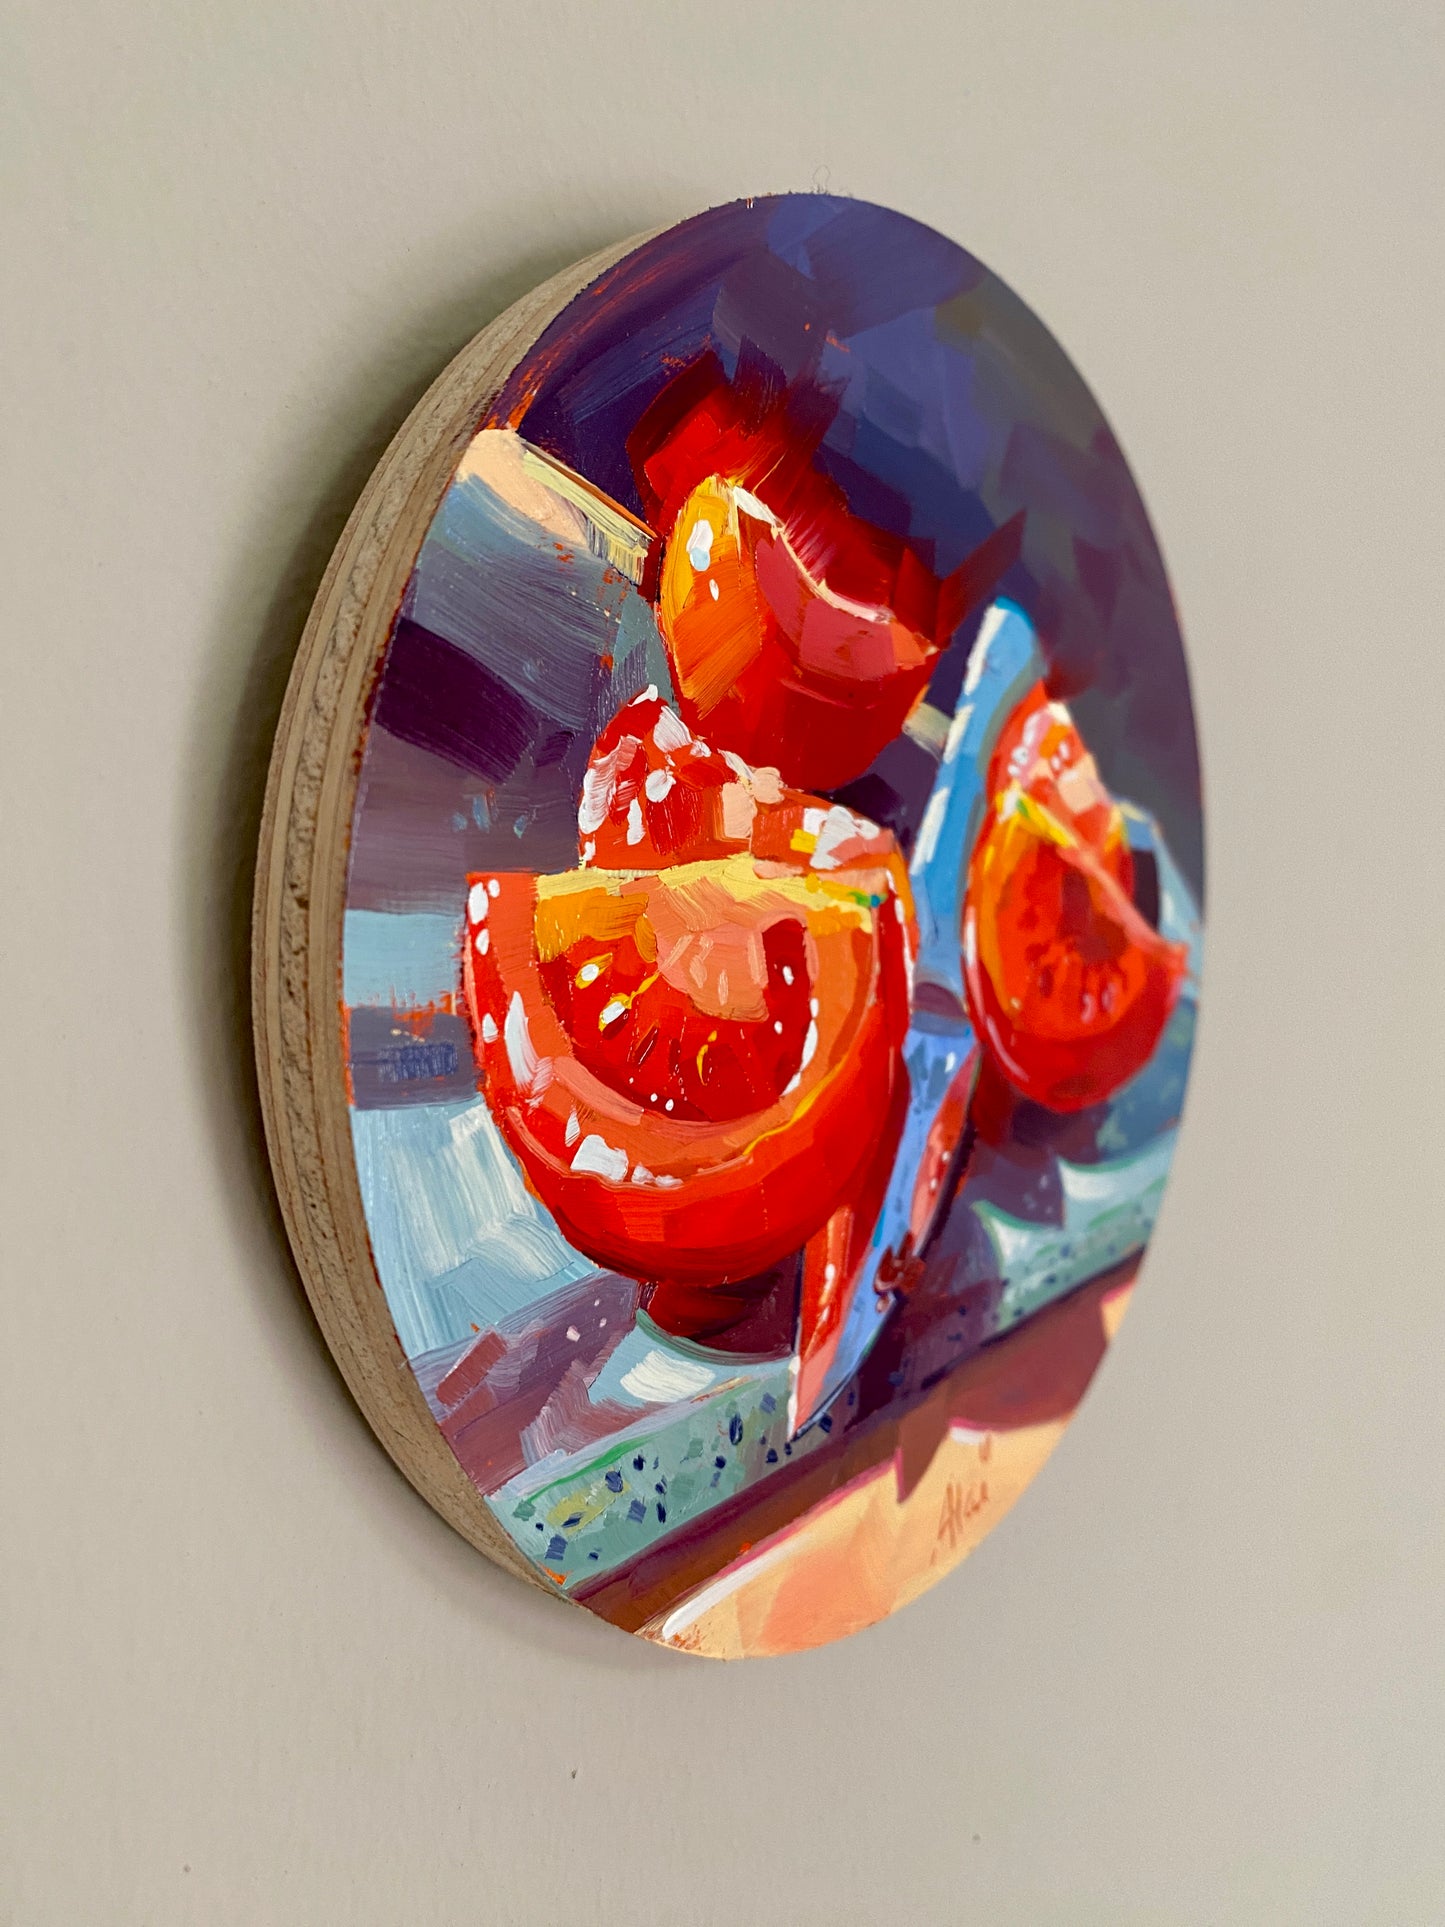 Tomato slices and knife - Original Oil Painting